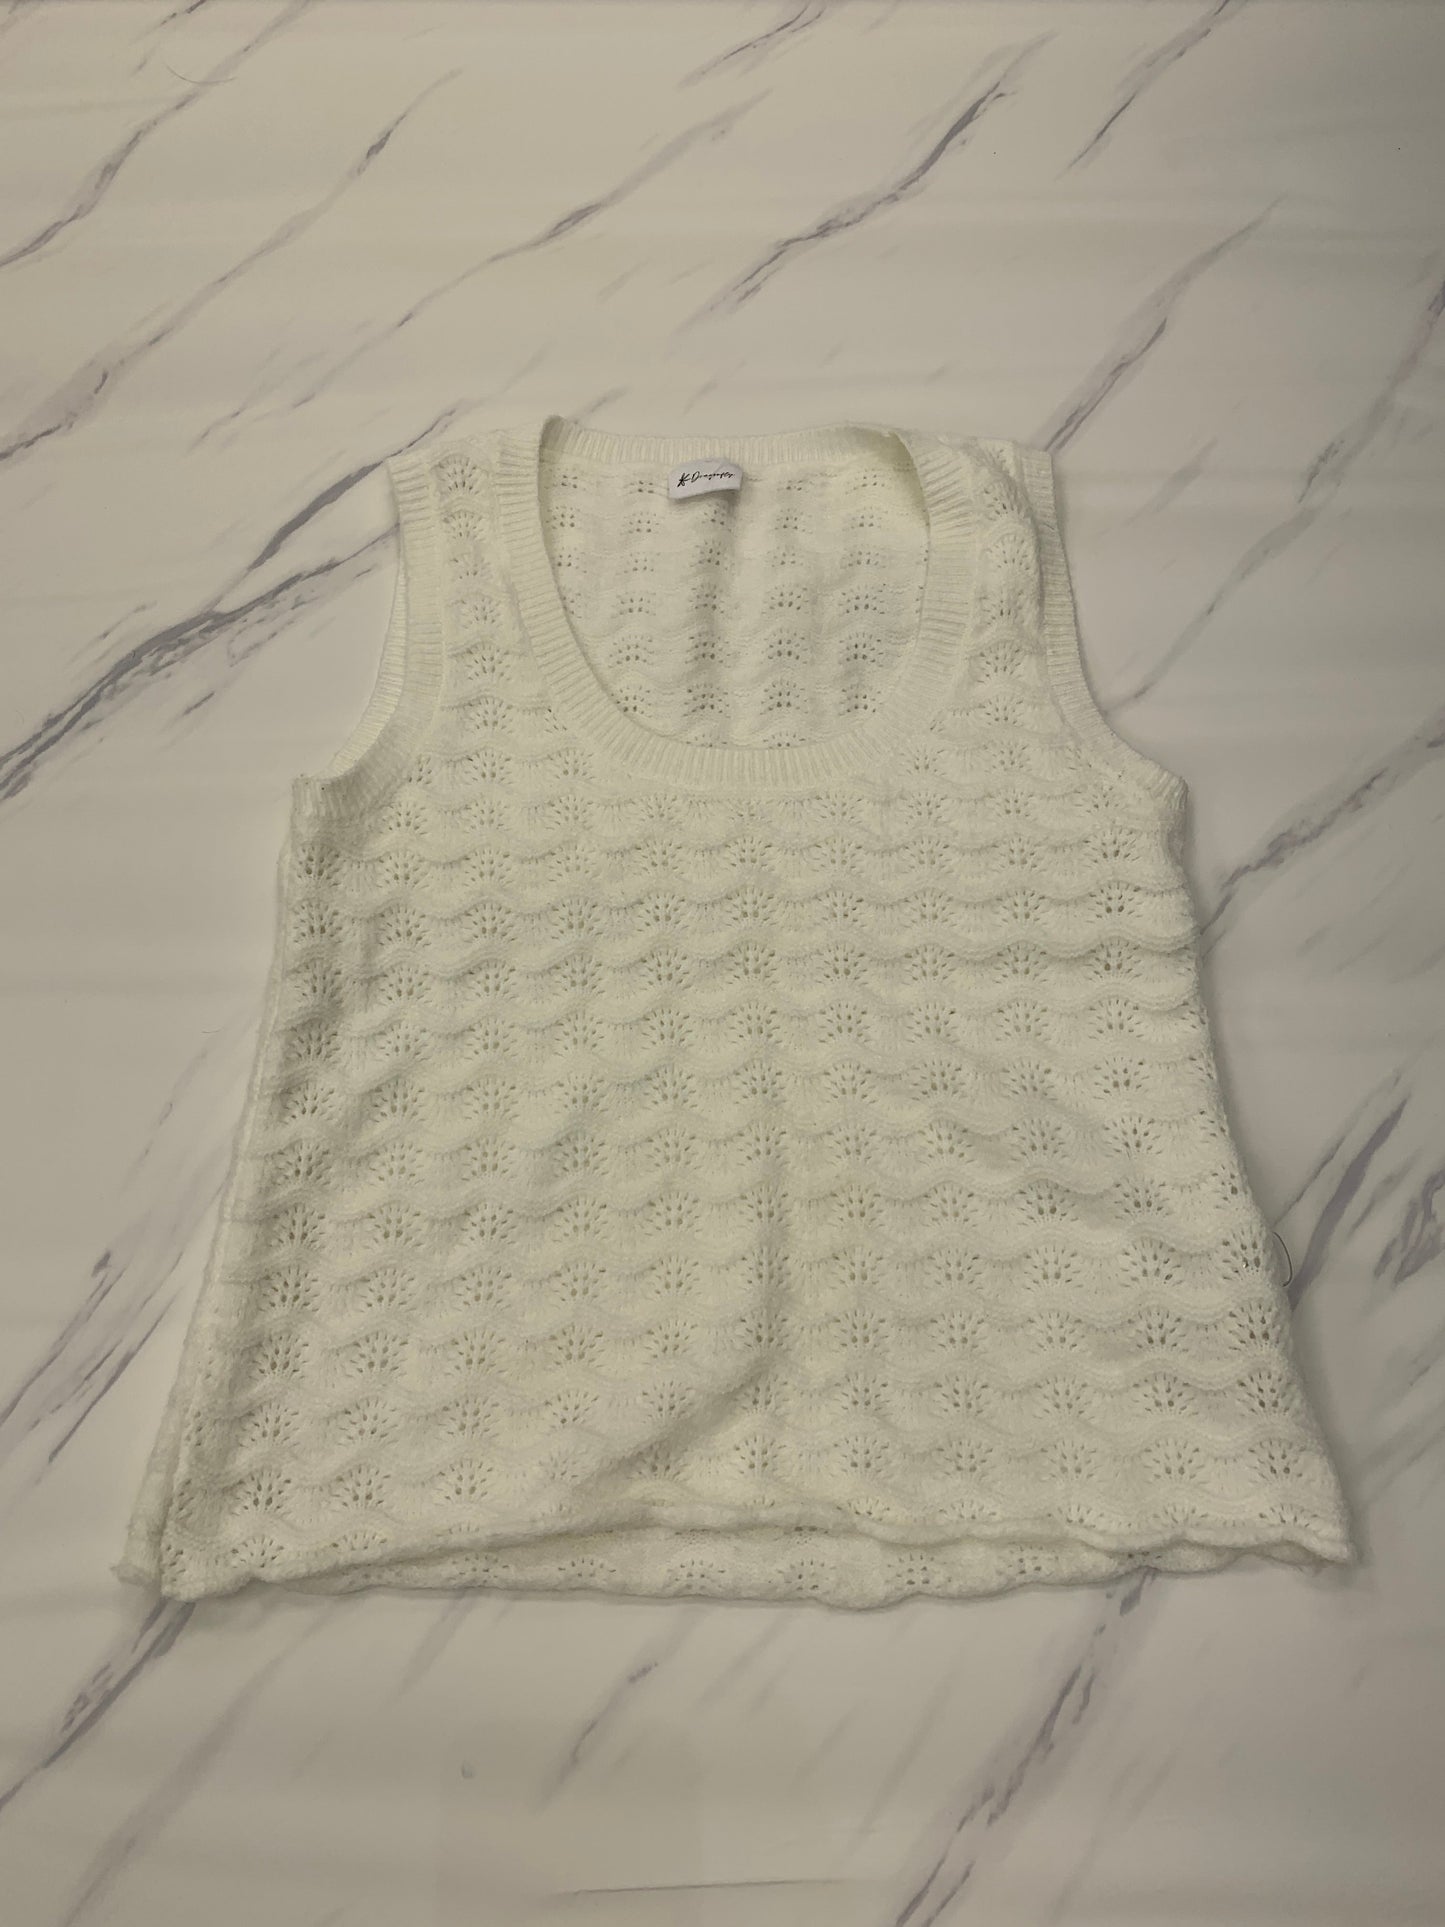 Top Sleeveless By Cmc  Size: M